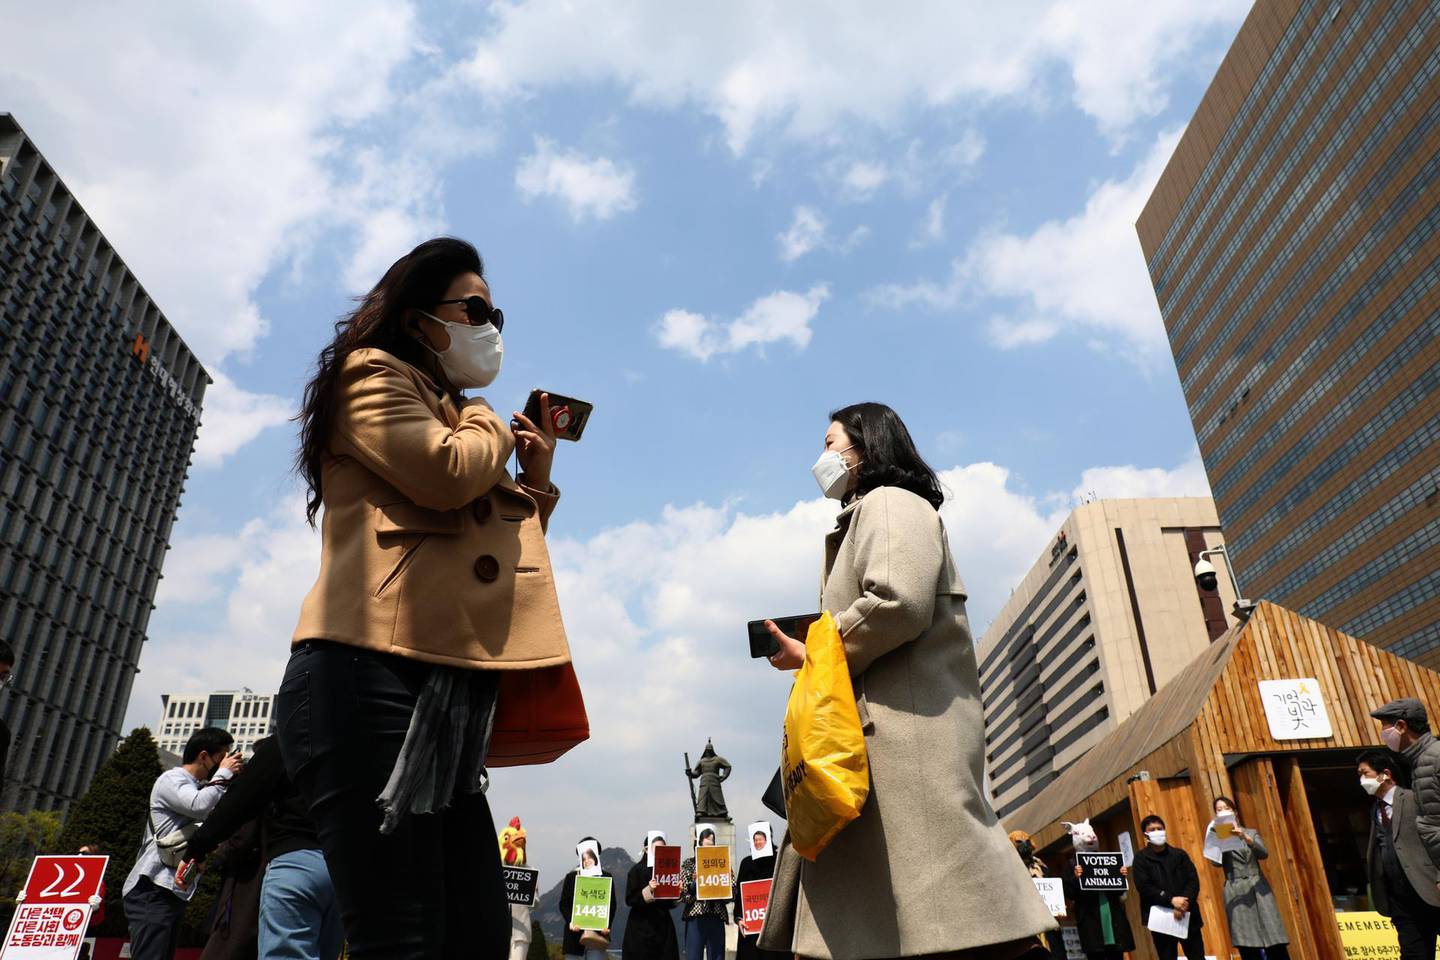 SEOUL, SOUTH KOREA - APRIL 10: South Koreans wear masks walk along the steet as South Koreans take measures to protect themselves against the spread of coronavirus (COVID-19) on April 10, 2020 in Seoul, South Korea. Preliminary voting has started at local polling stations across South Korea prior to the primary Presidential election on April 10. South Korea has called for expanded public participation in social distancing, as the country witnesses a wave of community spread and imported infections leading to a resurgence in new cases of COVID-19. According to the Korea Center for Disease Control and Prevention, 27 new cases were reported. The total number of infections in the nation tallies at 10,450. (Photo by Chung Sung-Jun/Getty Images)